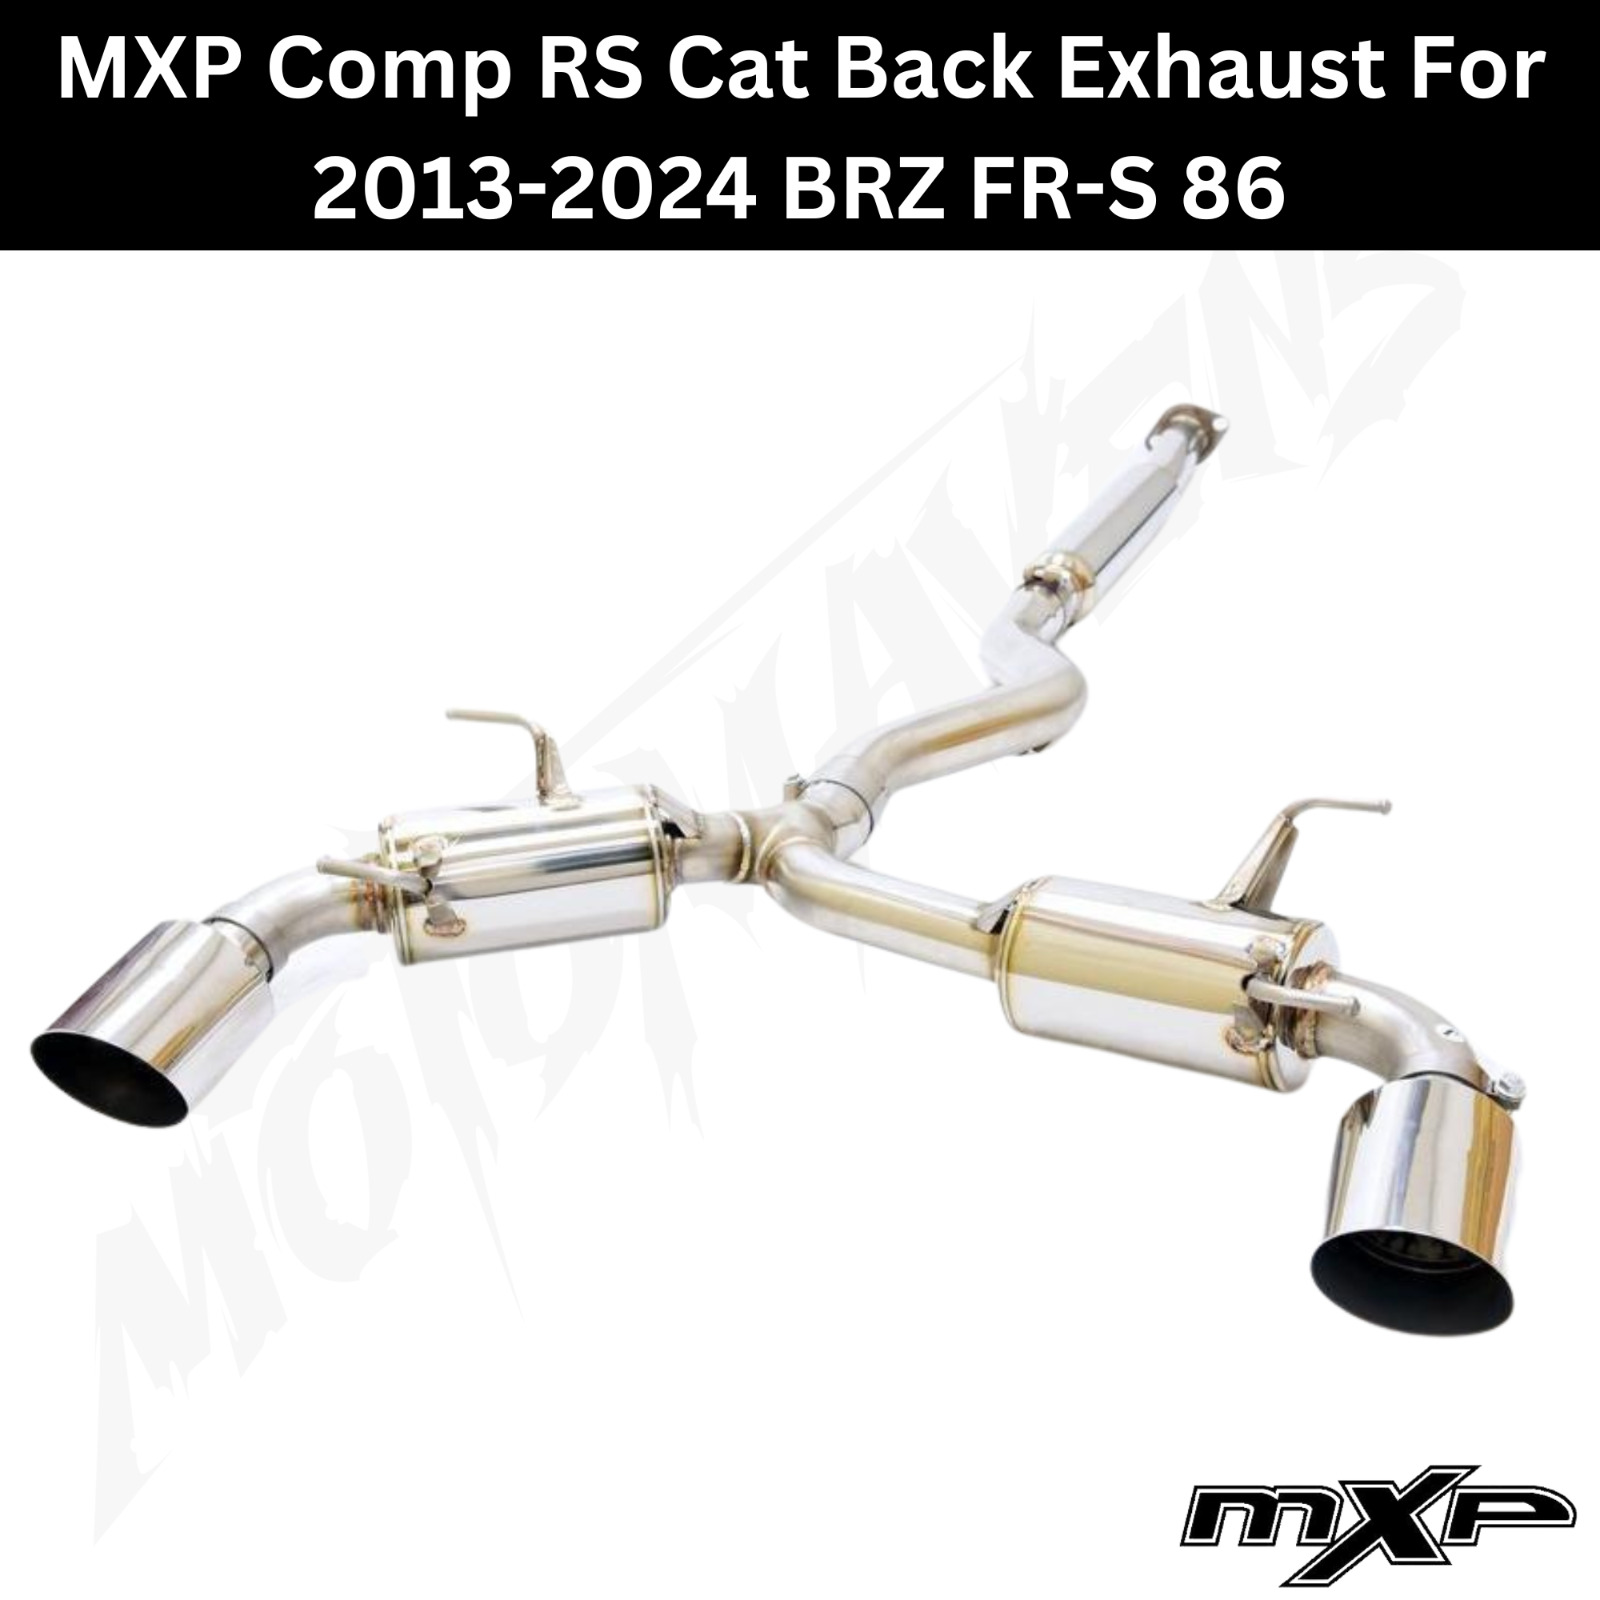 MXP Comp RS Cat Back Exhaust For 2013-2024 BRZ FR-S 86 Stainless Steel